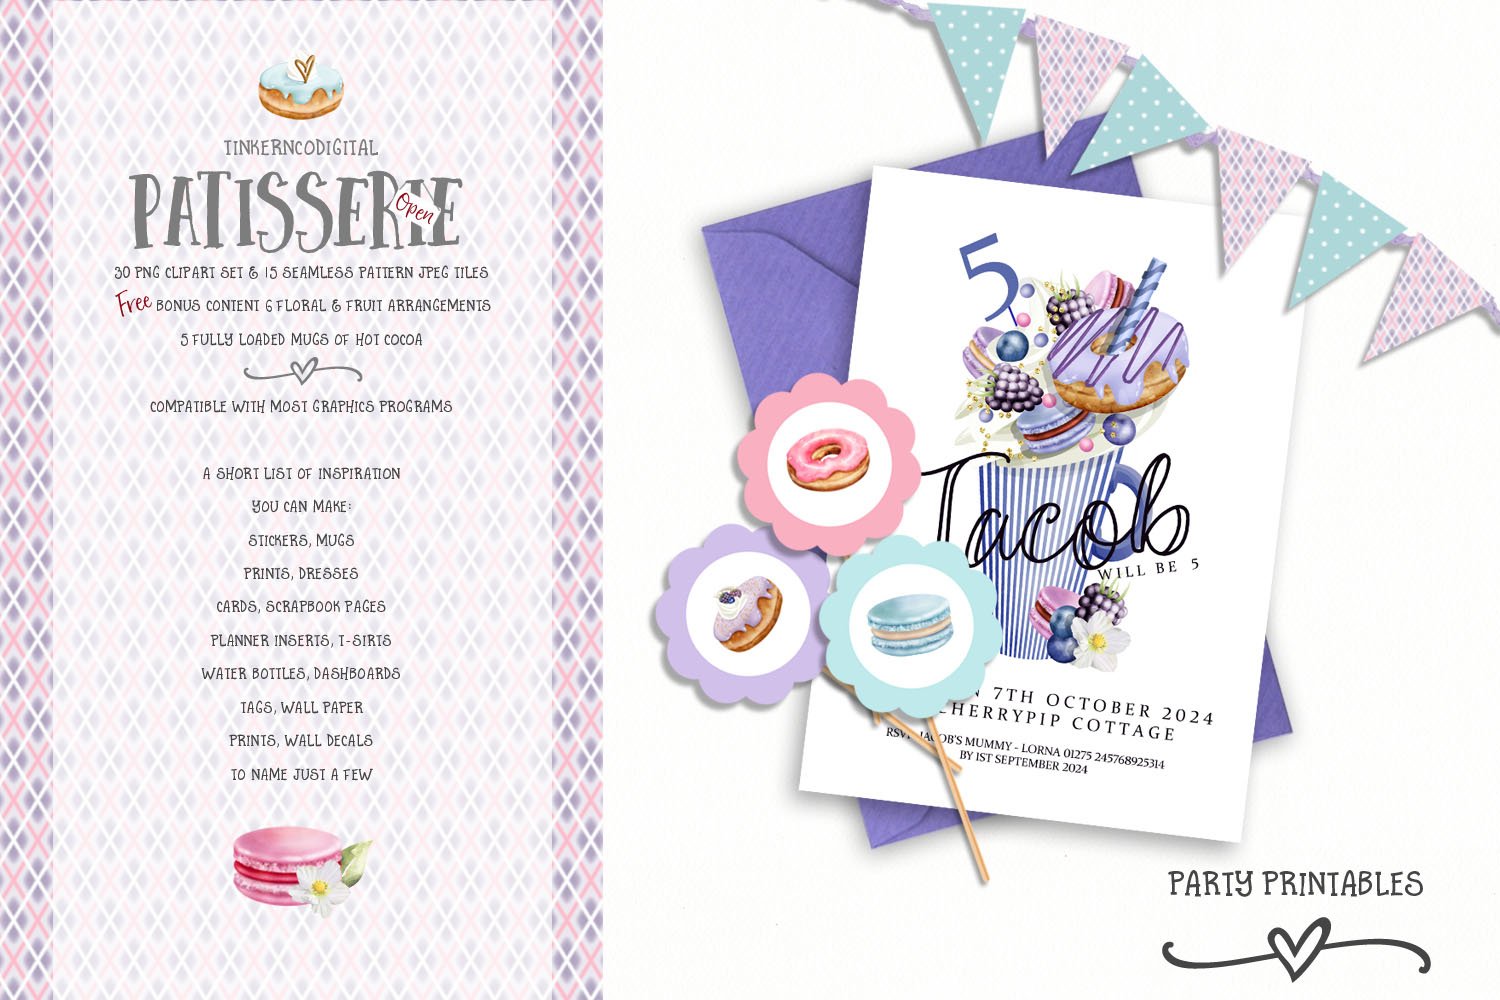 Lilac boys invitation and party printables for 5th birthday parties.